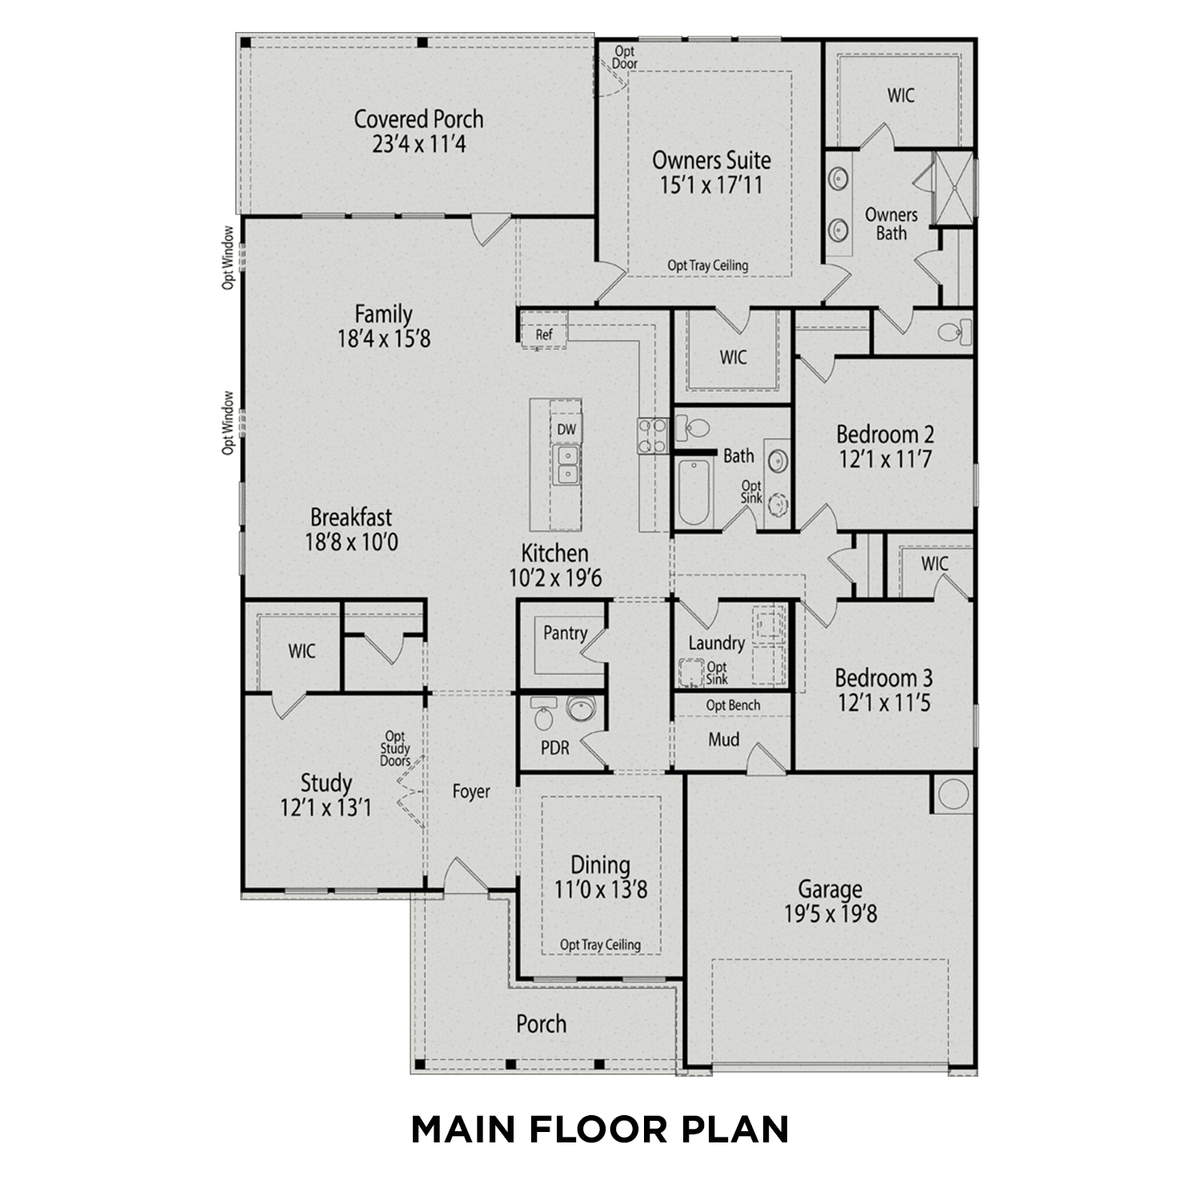 1 - The Magnolia A buildable floor plan layout in Davidson Homes' Glenmere community.